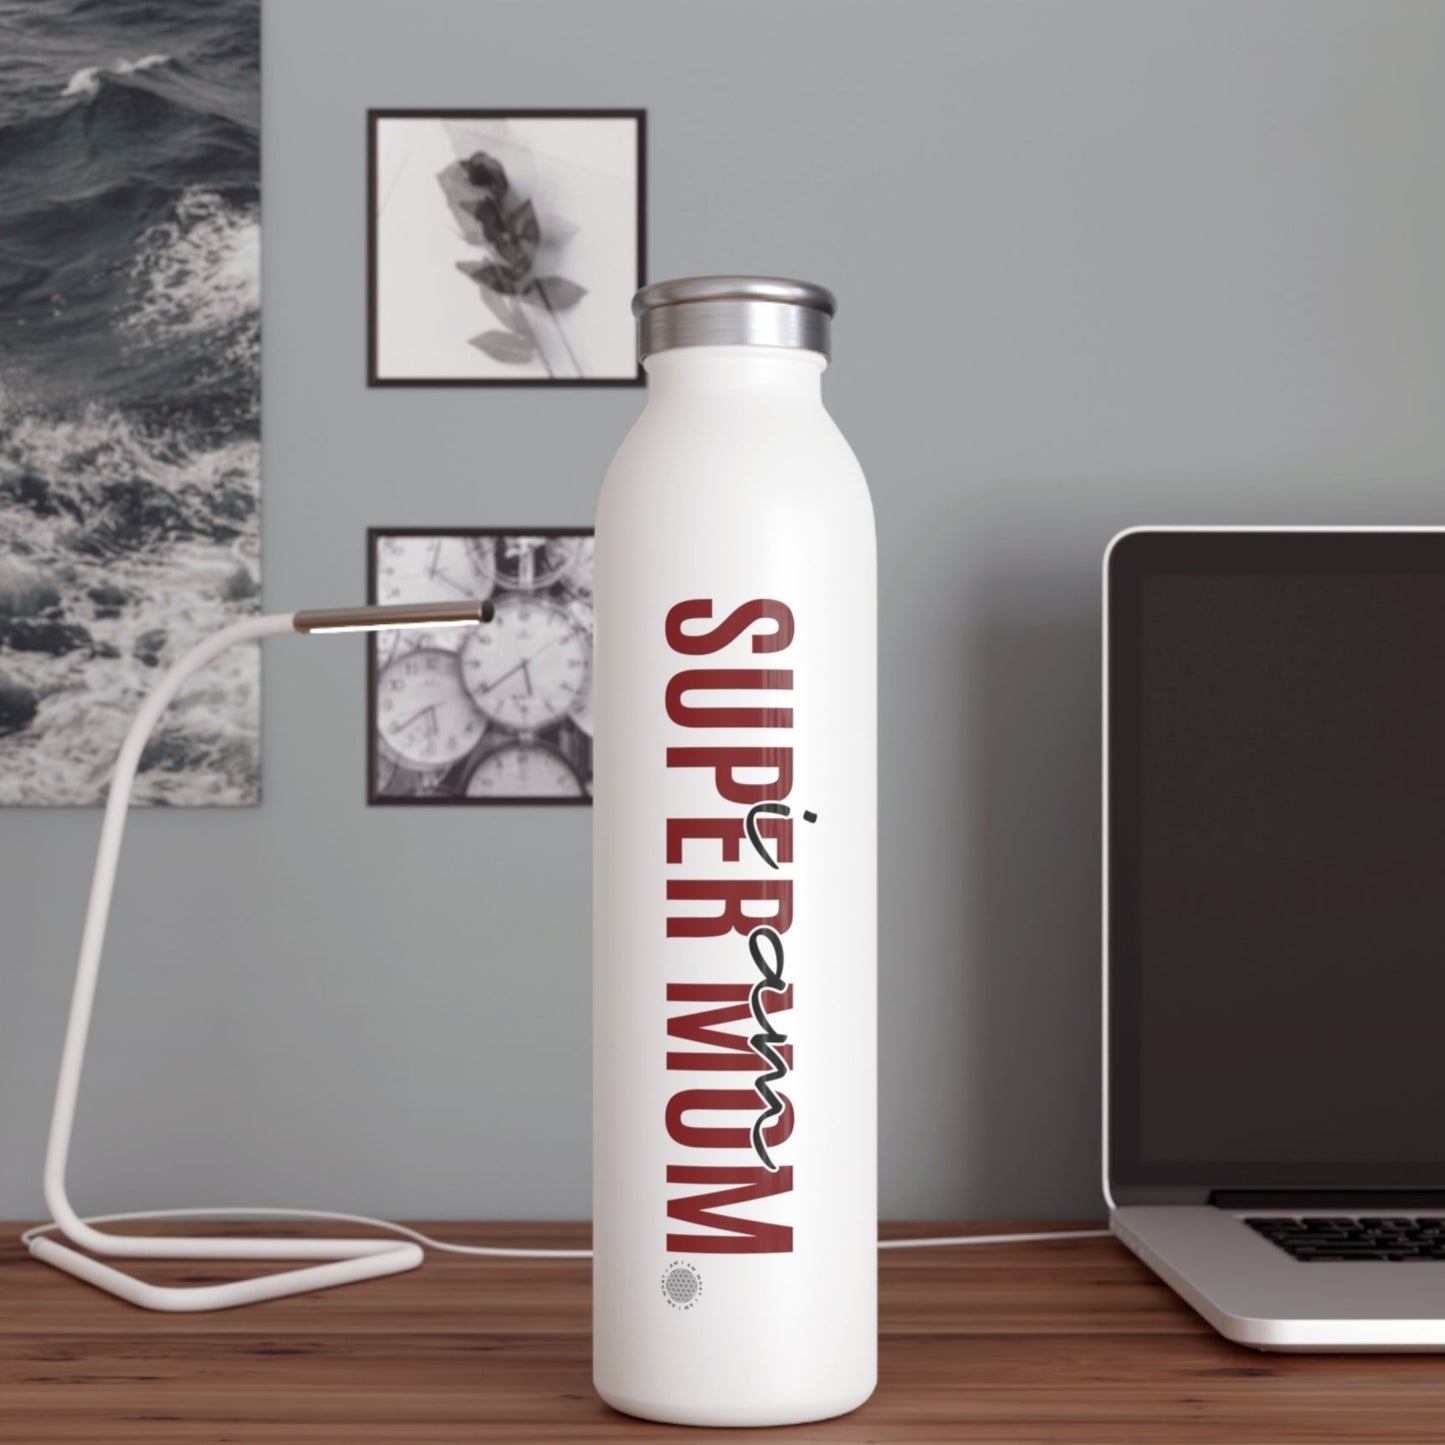 Our 'I Am Super Mom' water bottle is perfect for your loving mother who does absolutely everything for you and always on the go. Show her you are grateful.